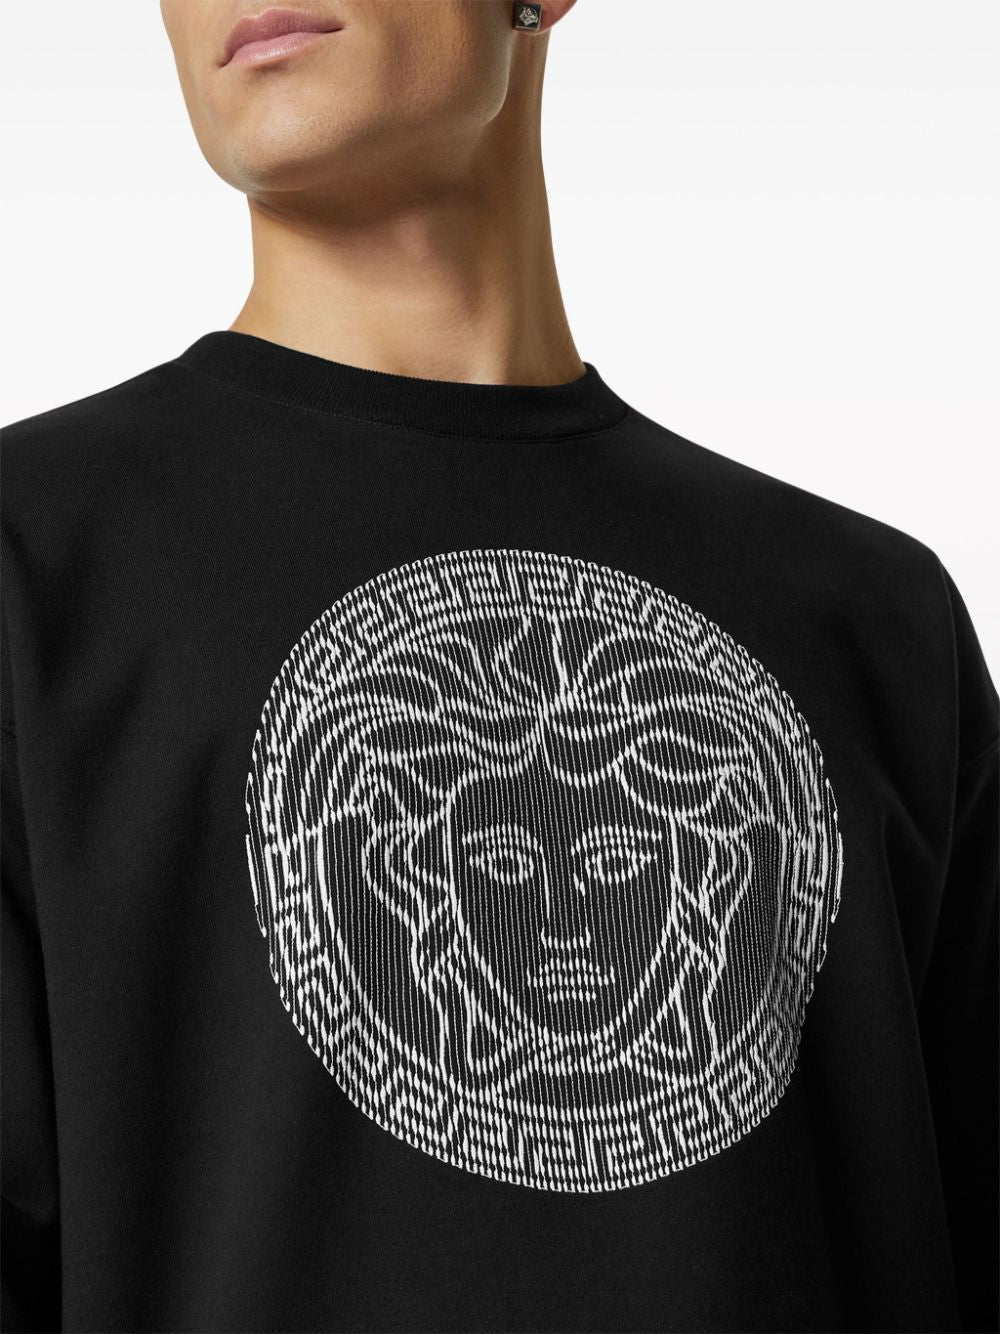 Medusa Sliced-embroidery cotton embroidery<BR/><BR/><BR/>